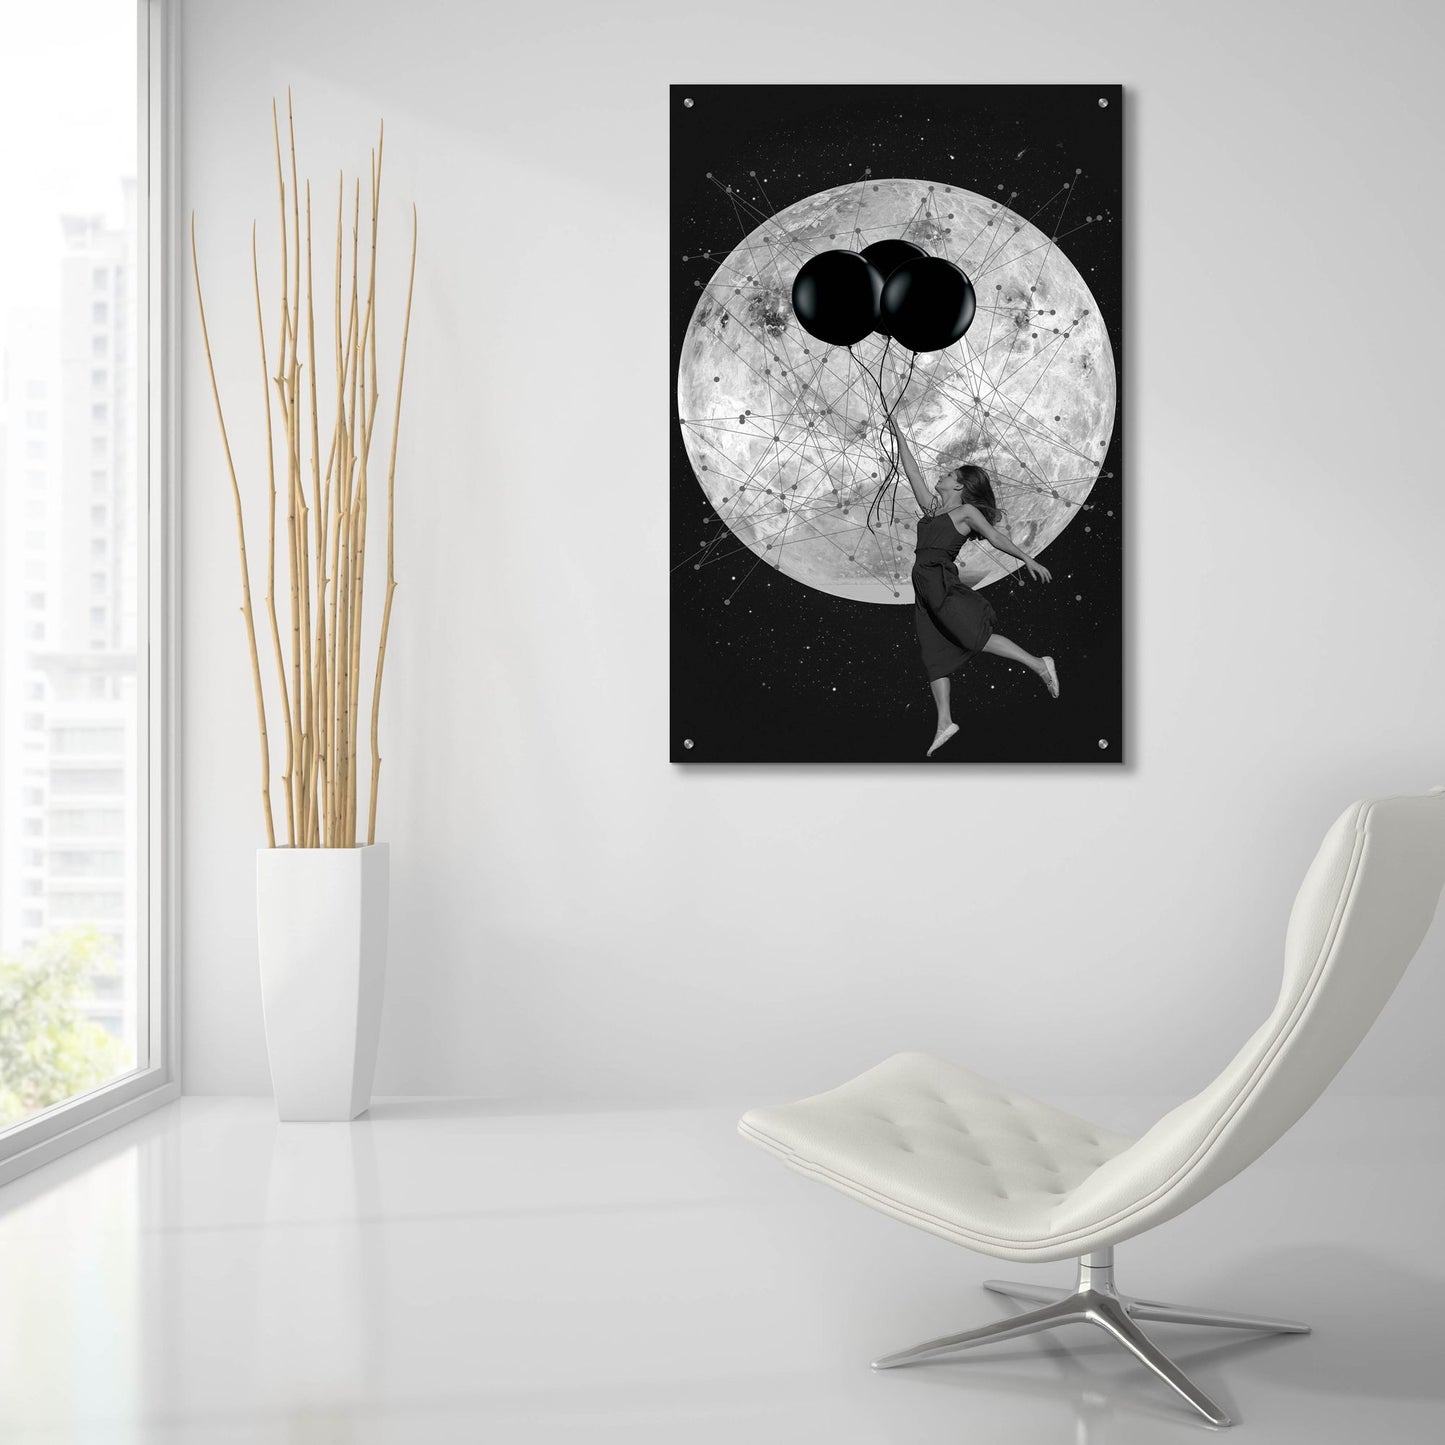 Epic Art 'Women Are From Venus' by Elo Marc, Acrylic Glass Wall Art,24x36